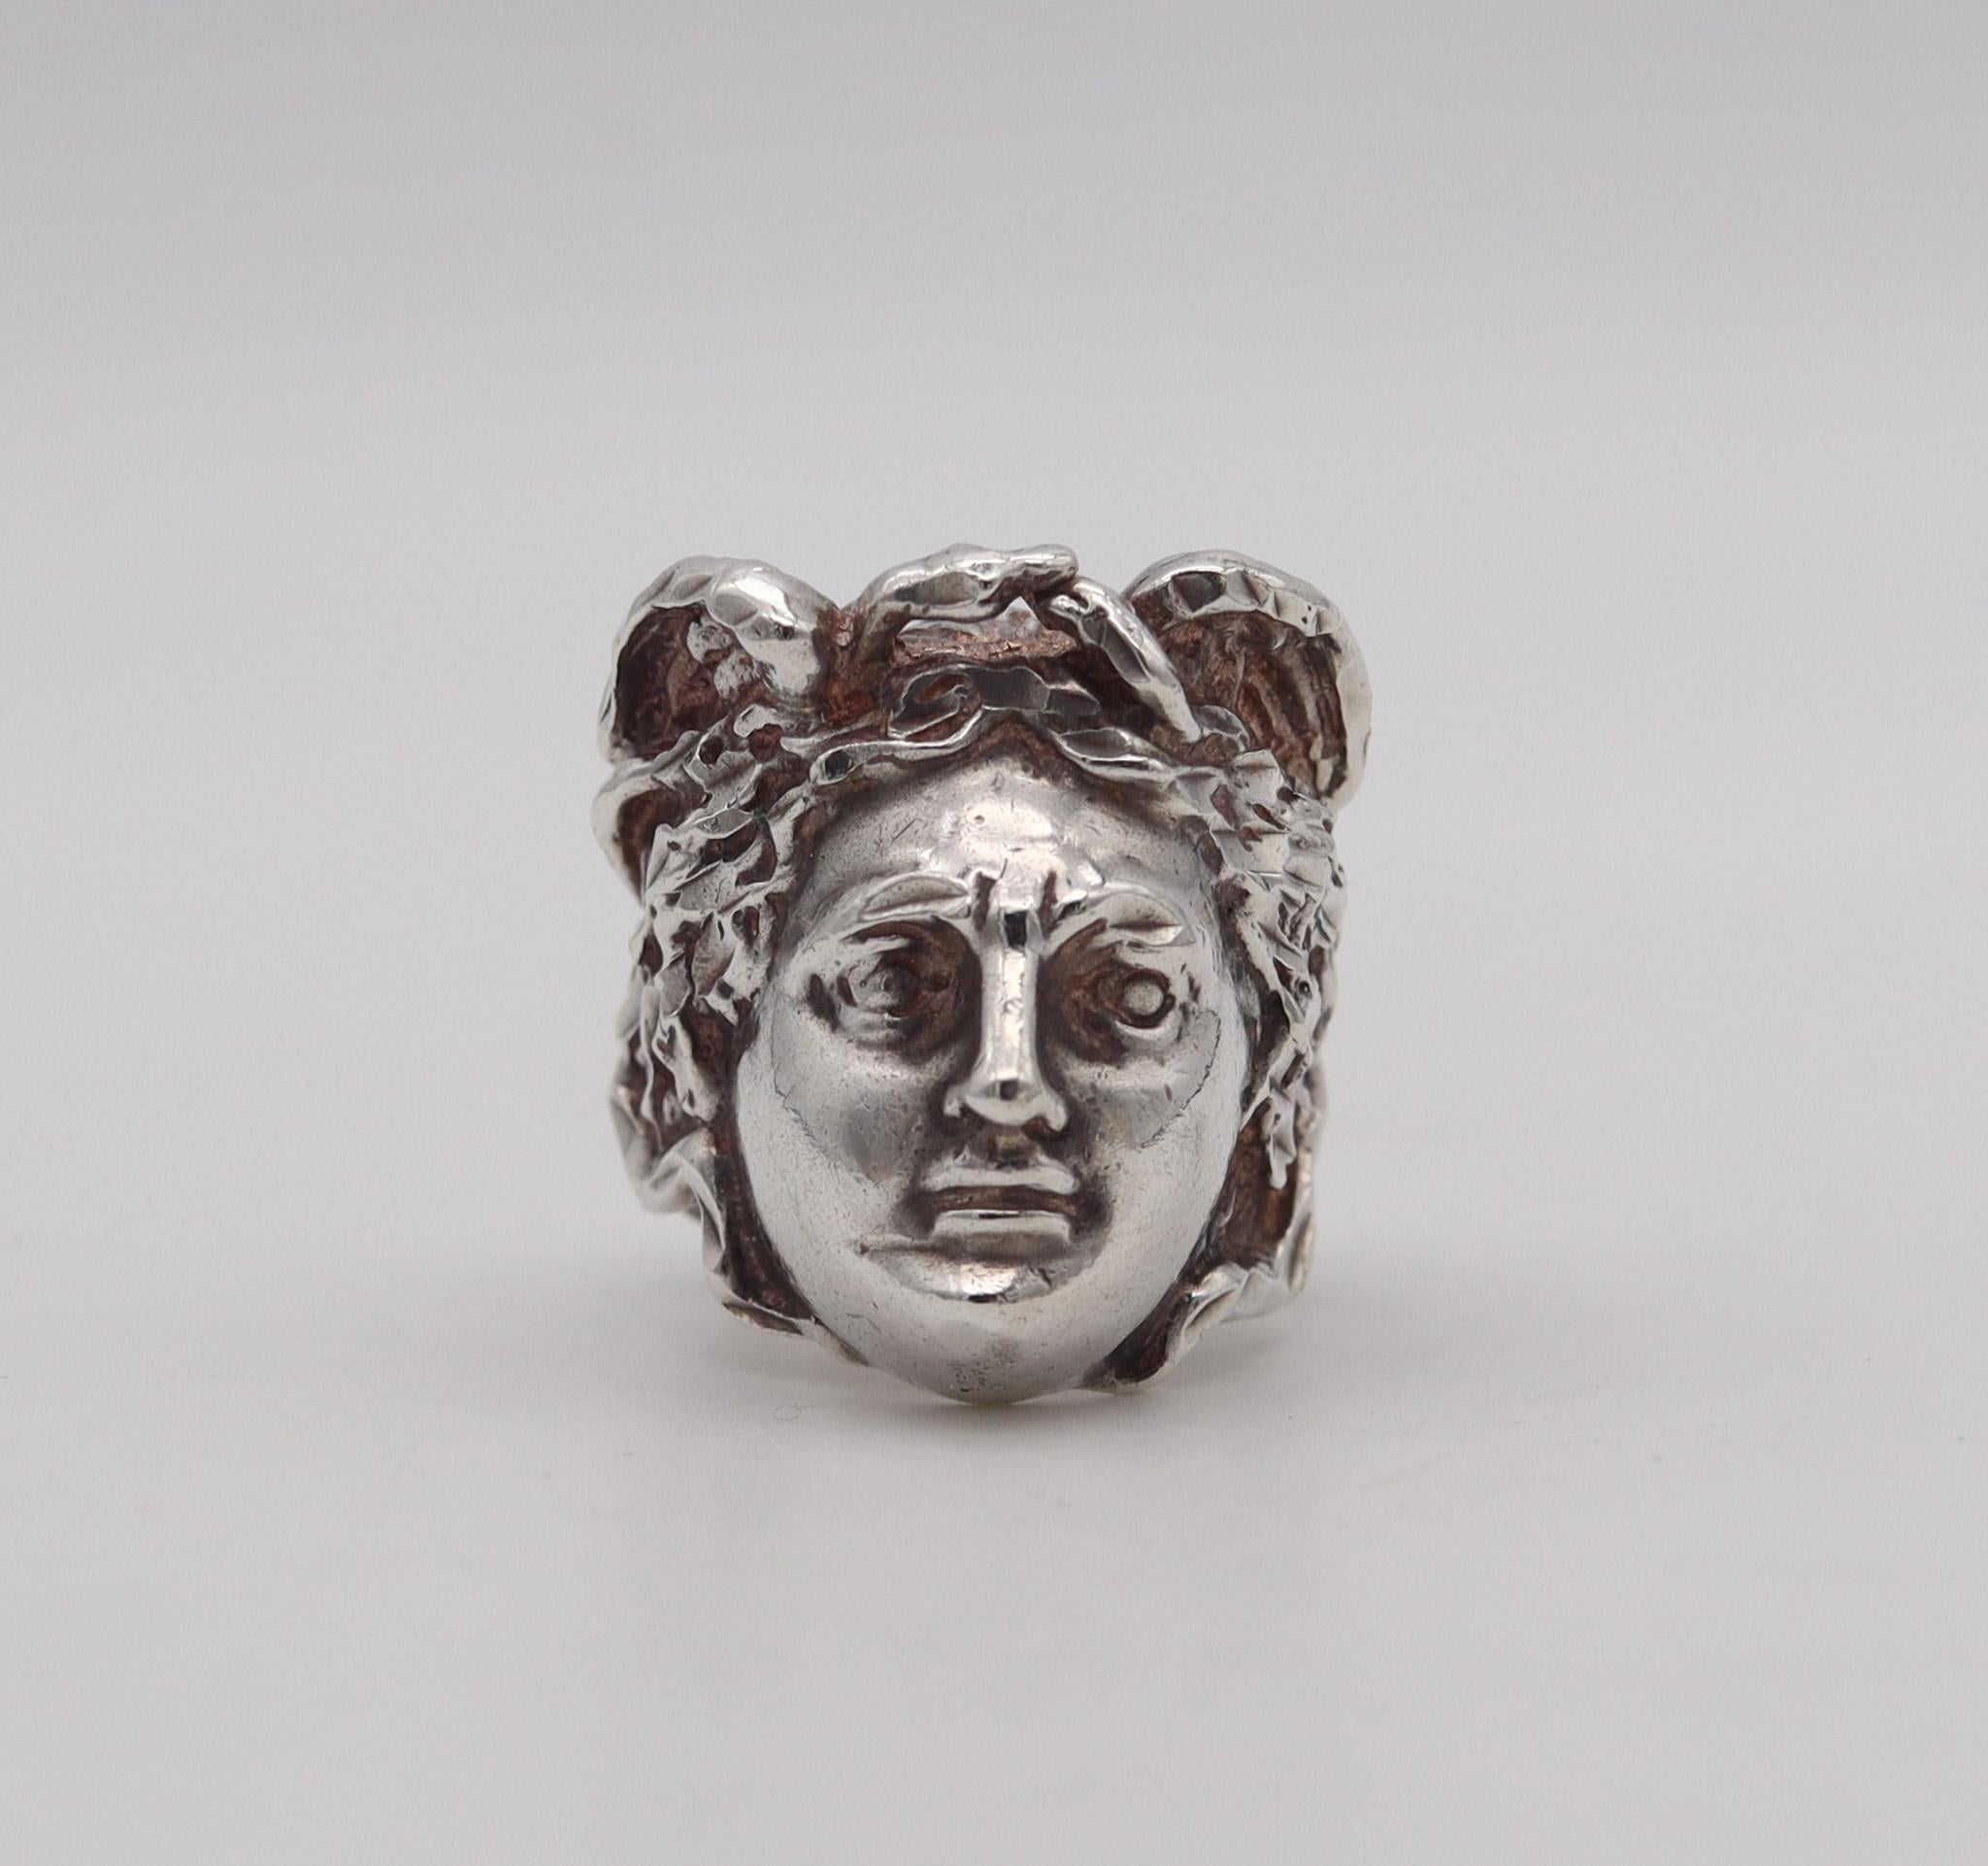 Ring with the portrait of Mercurius.

An extremely well detailed ring, created in Italy back in the 1970. The ring has been crafted in the baroque style with great high relief details in solid .925/.999 sterling silver with textured and polished